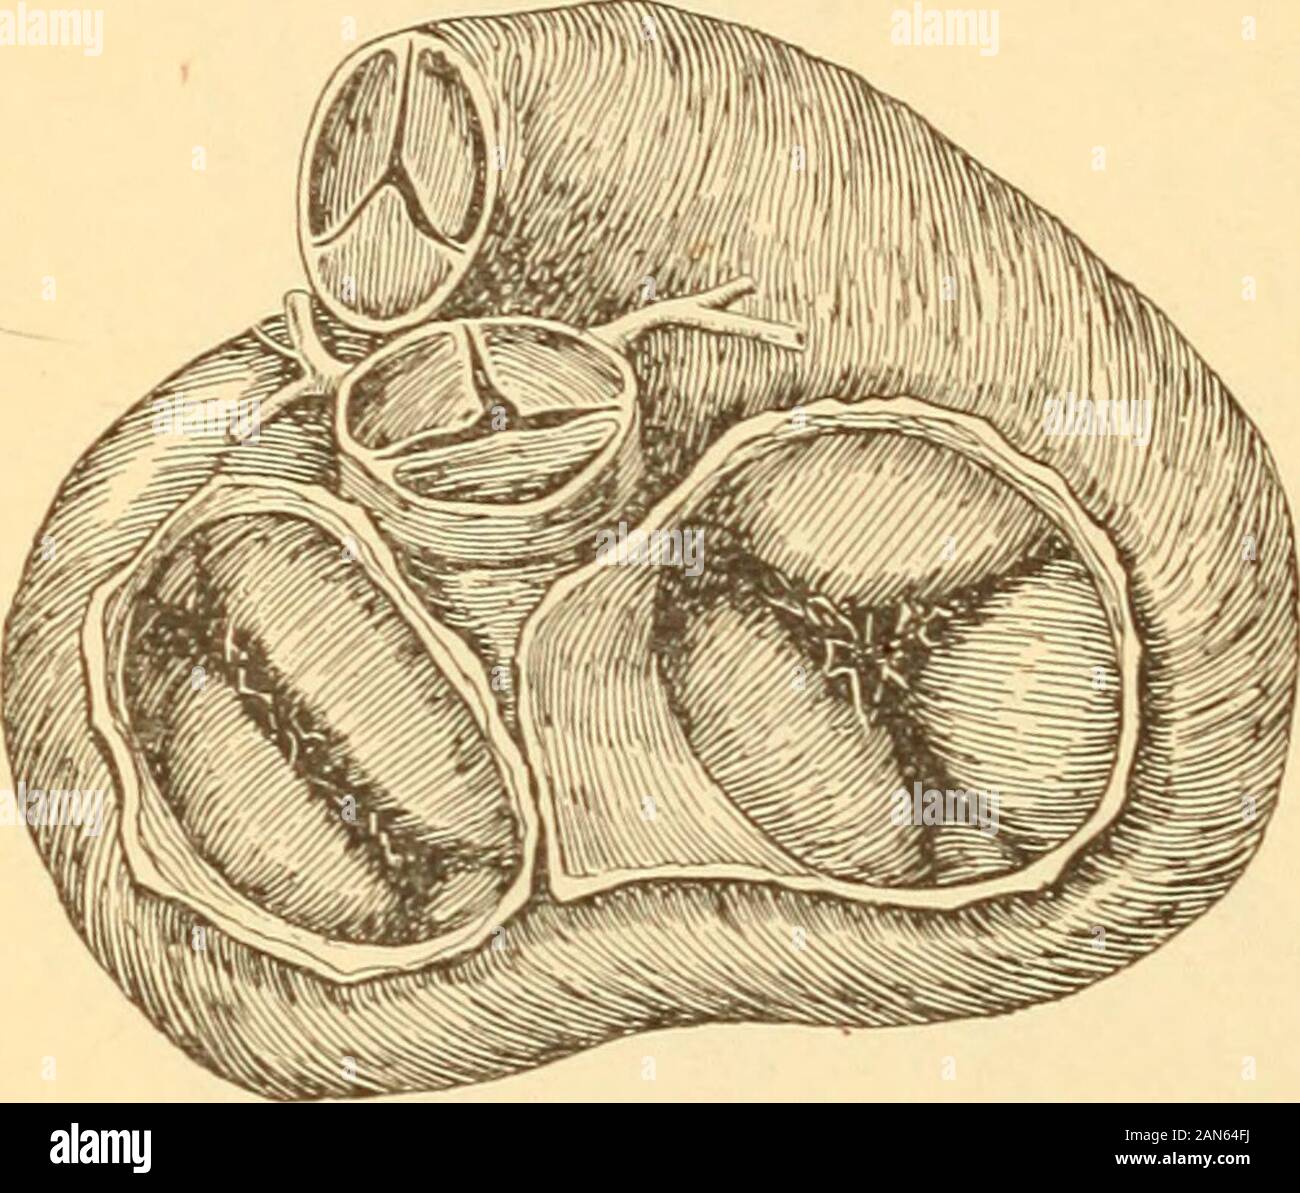 Anatomy, physiology and hygiene for high schools . Interior of heart, showing right auricleand ventricle and valves. rt, auricle; c, semilunar valve; i, inferior venacava; p, pulmonary artery: s, superior vena cava;t, tricuspid valve; v, ventricle. 158 PHYSIOLOGY AND HYGIENE. Heart valves. Structure of the heart. The heart is composed of musculartissue of a special kind, described iu the chapter upon themuscles. This muscular wall is lined without by the cardiaclayer of the pericardium, within by a membrane known as the endocardium (G-reek en-don, within, and Iardia,heart). This membrane has a Stock Photo